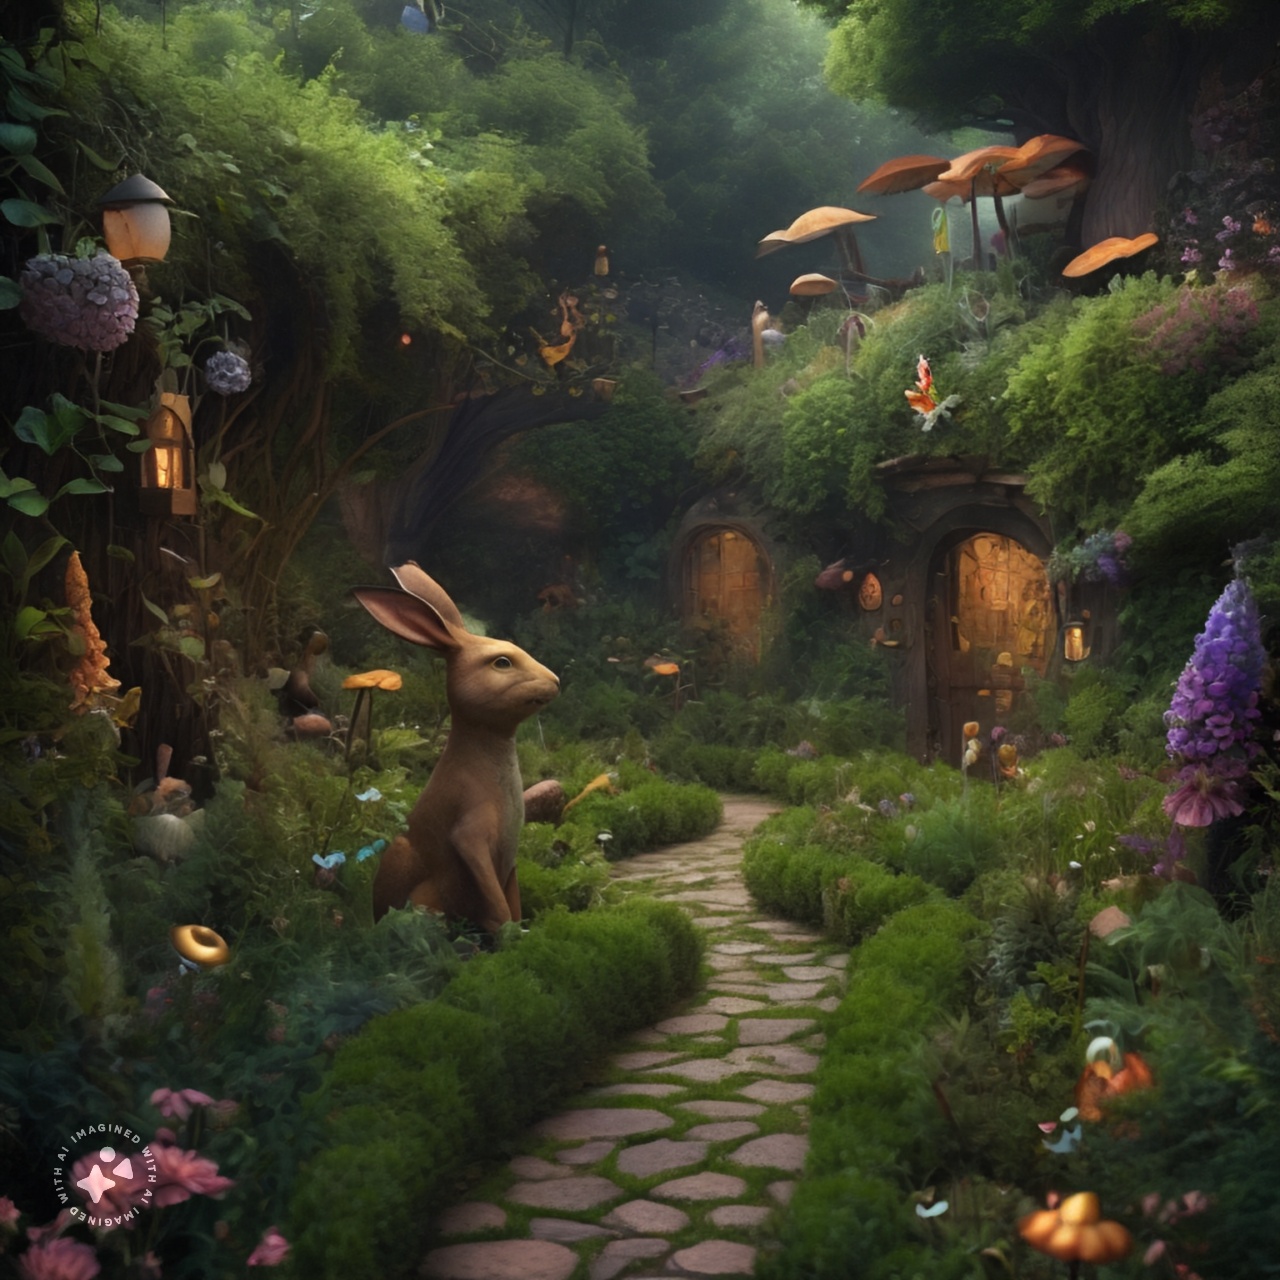 imagine ai A whimsical, fairytale like garden filled with talking animals and enchanting flora, magical